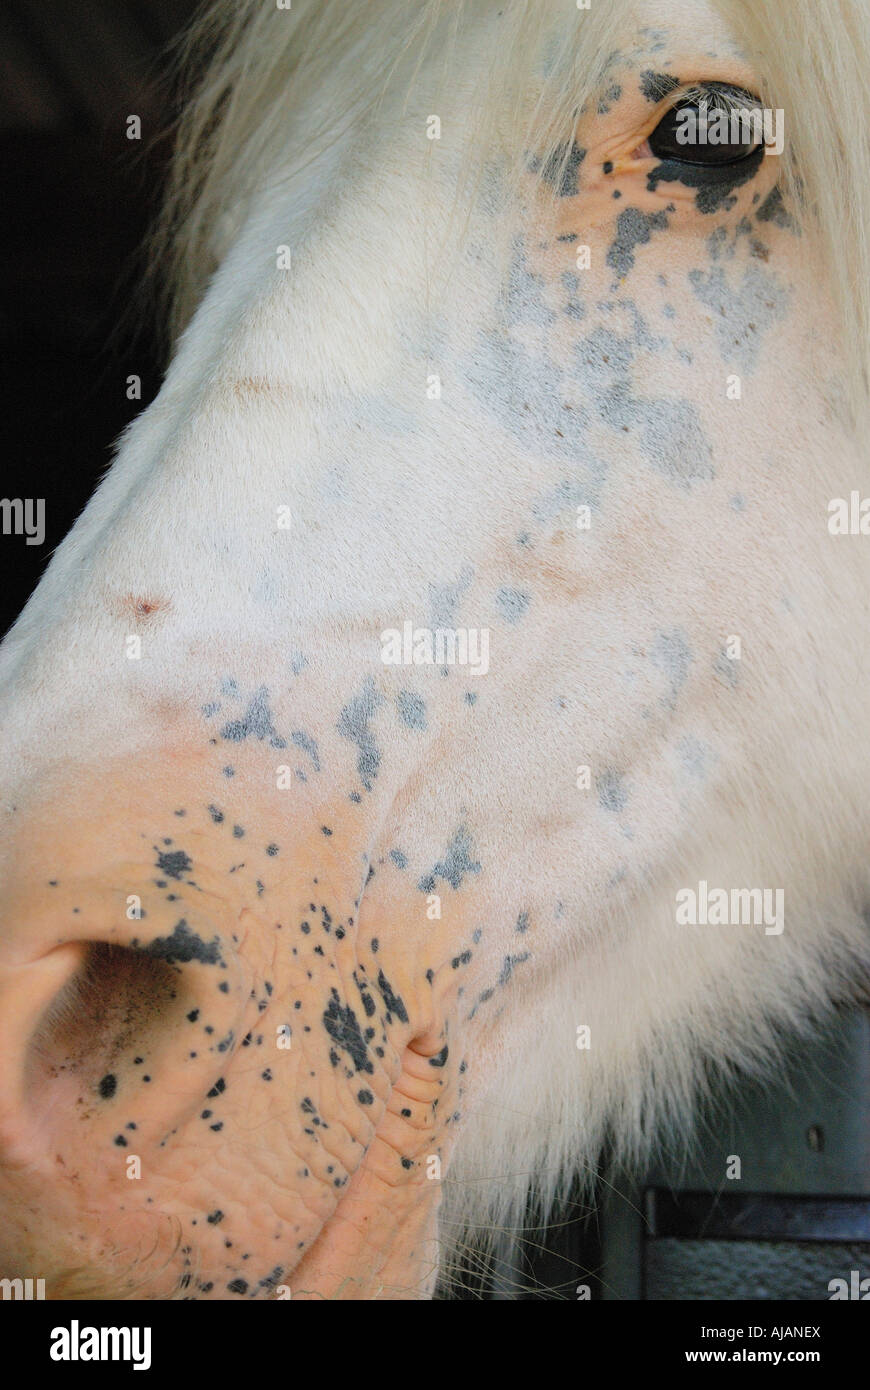 Close up facial image of a pure white horse with very pink skin showing around nose and eye Stock Photo